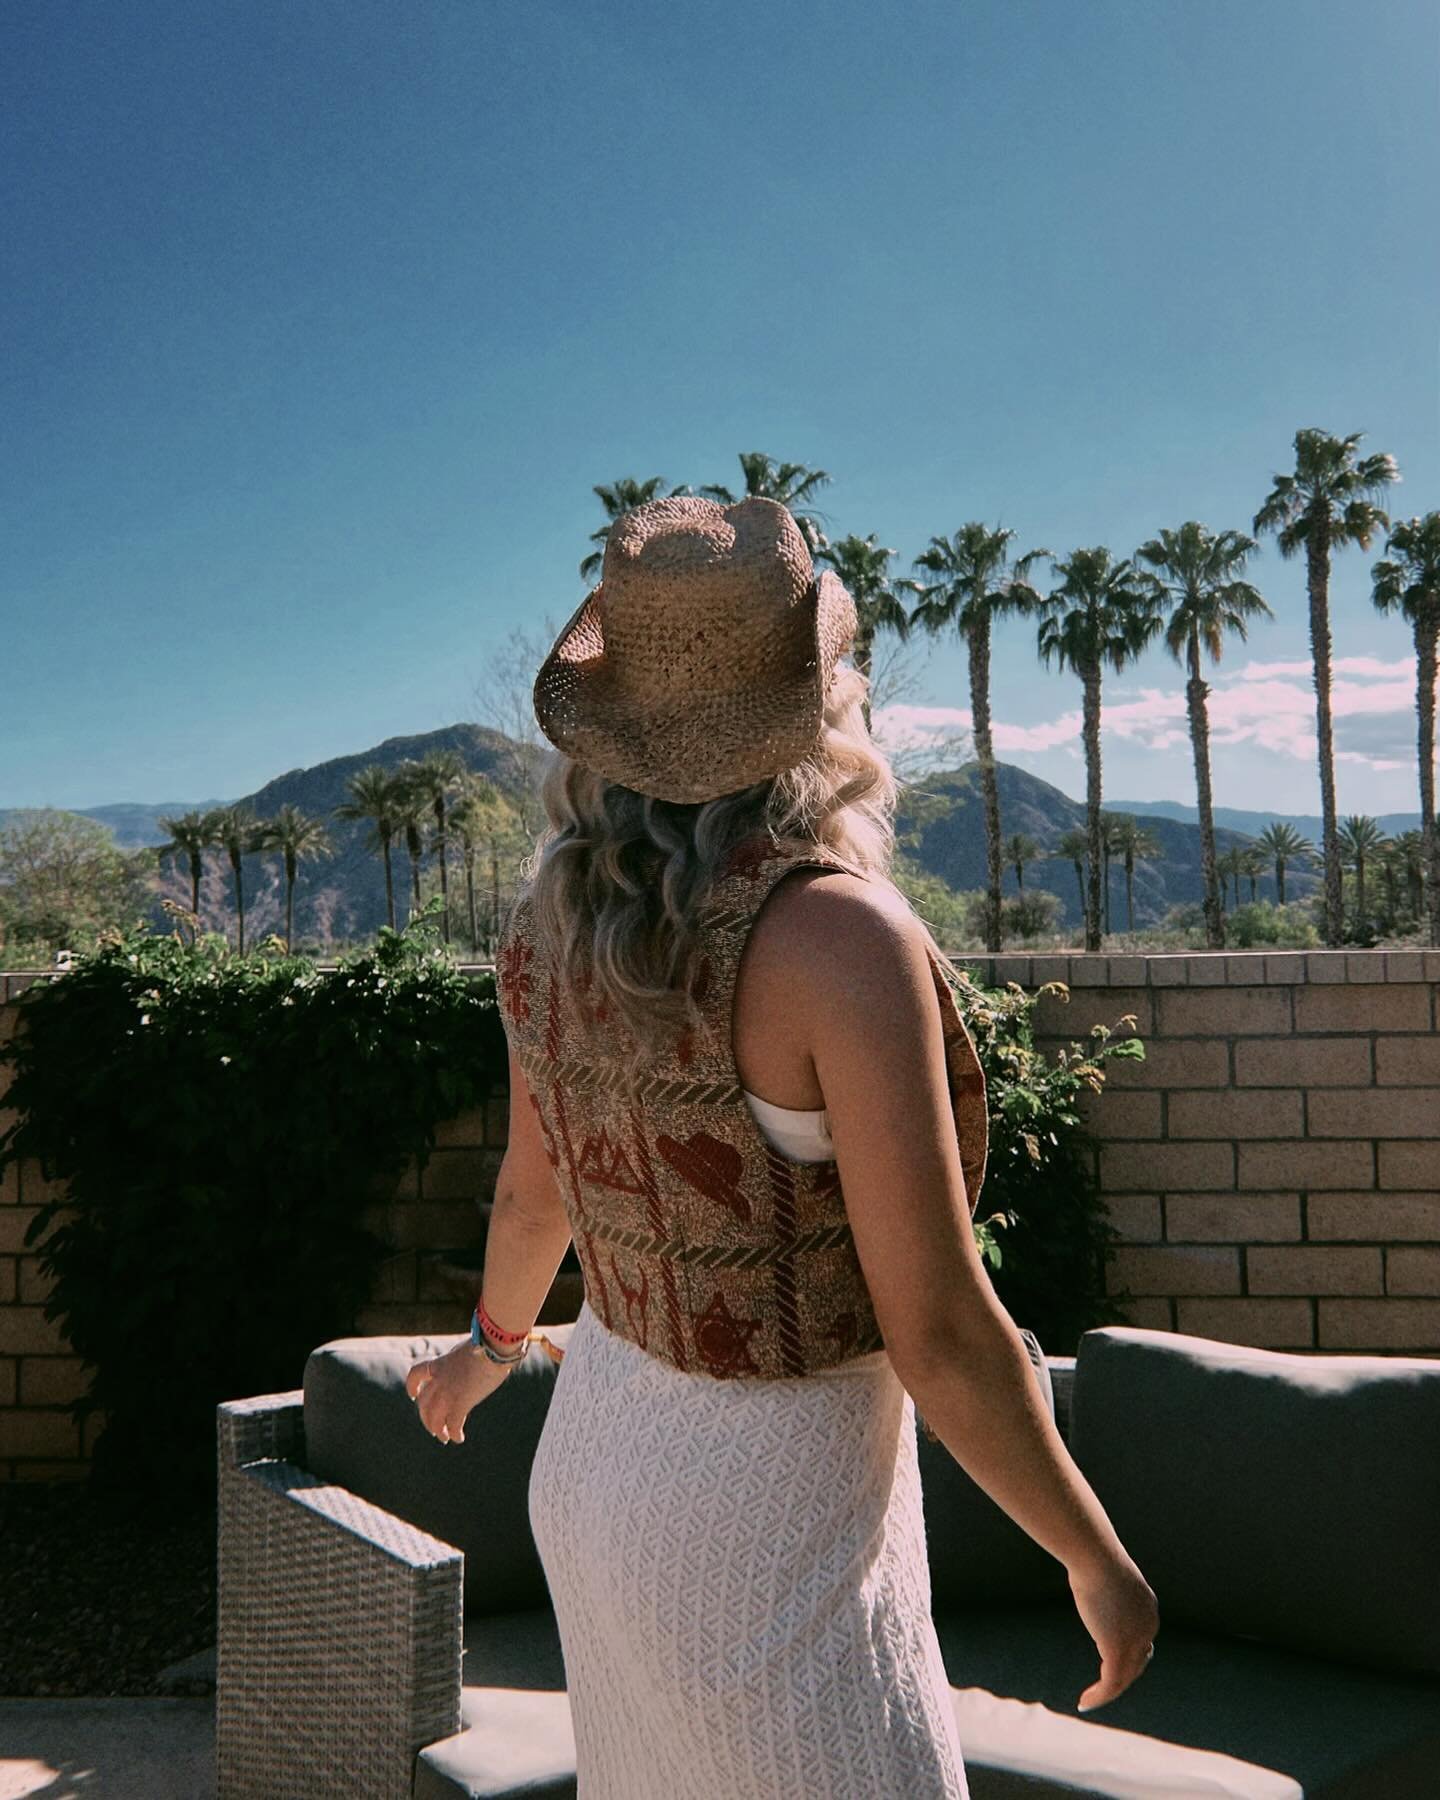 Cool it cowboy ✨🍻 Obsessed with @ridinwitdatniina in the Indio Cowgirl Vest for @stagecoach 🎶 Head to the link in bio to shop your next festival look! 🌼